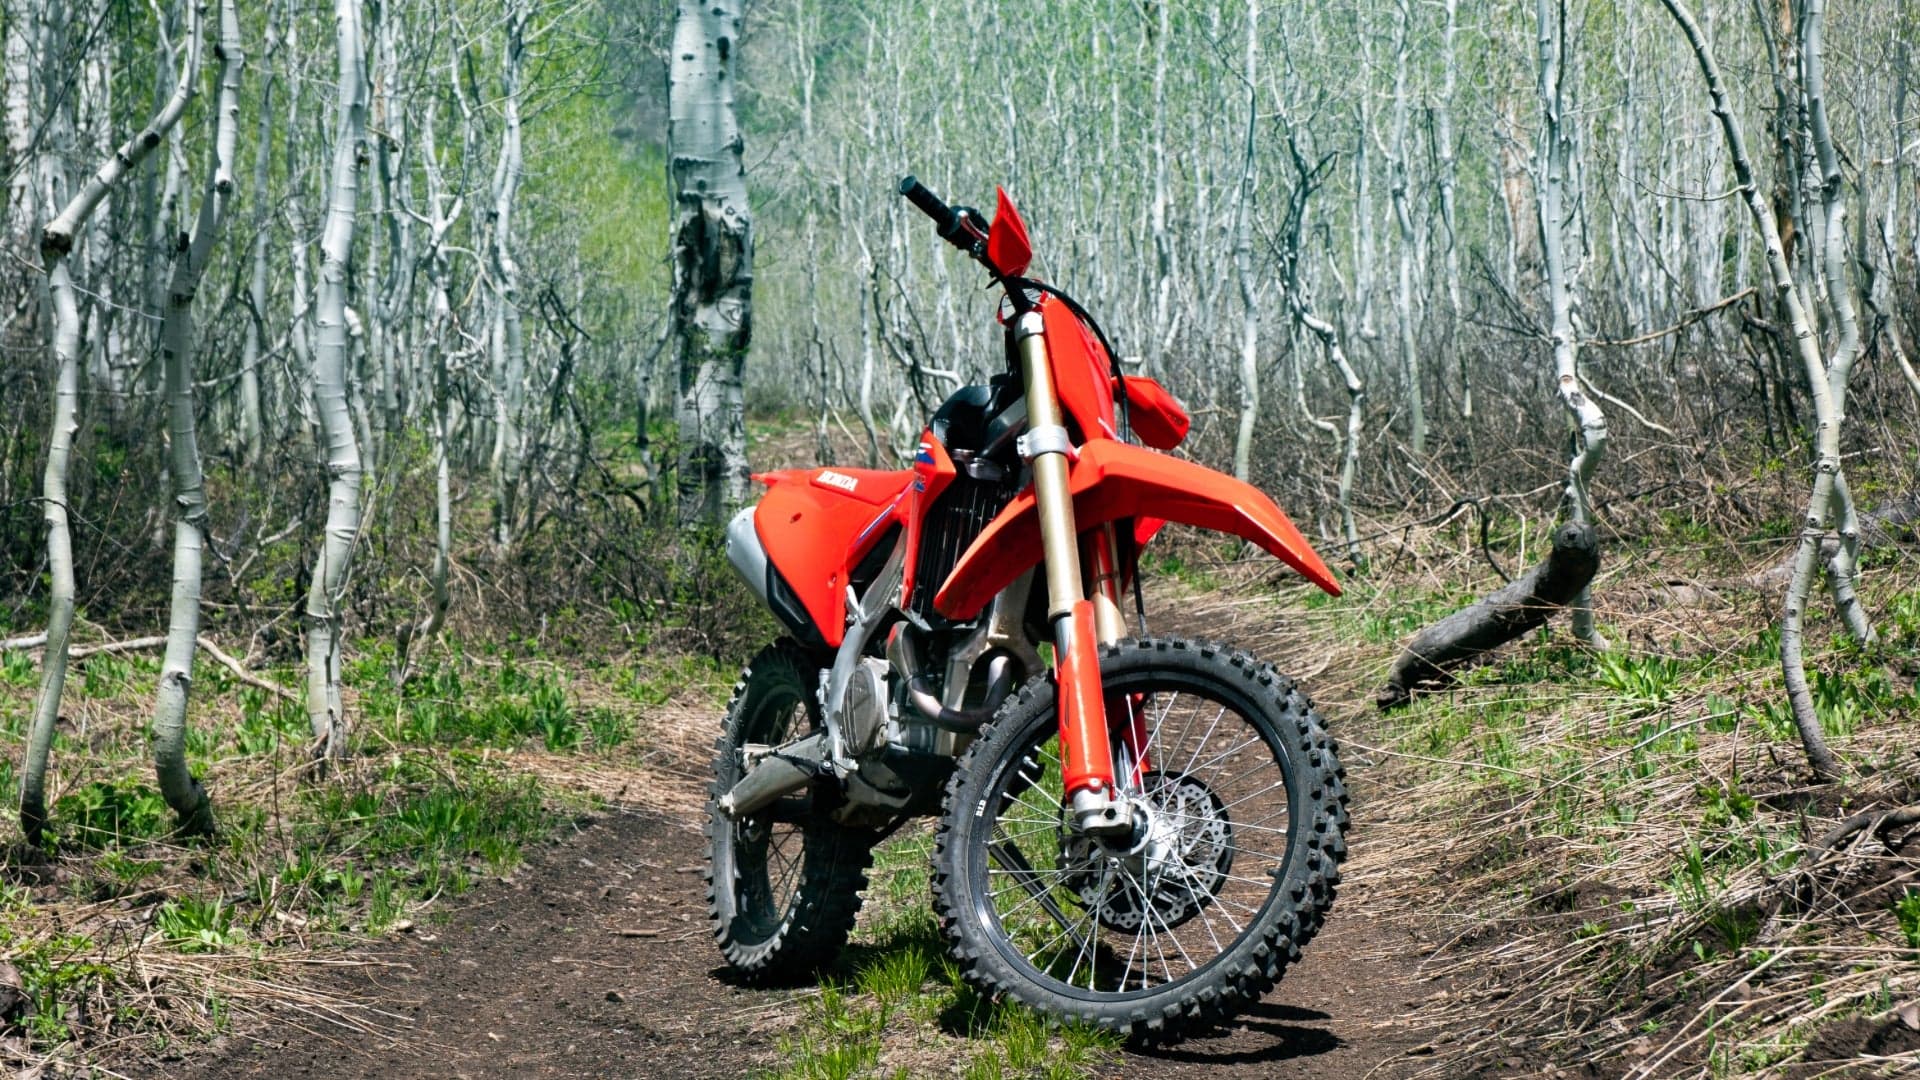 2022 Honda CRF450RX Review: A Punchy Race Bike You Can Adventure With